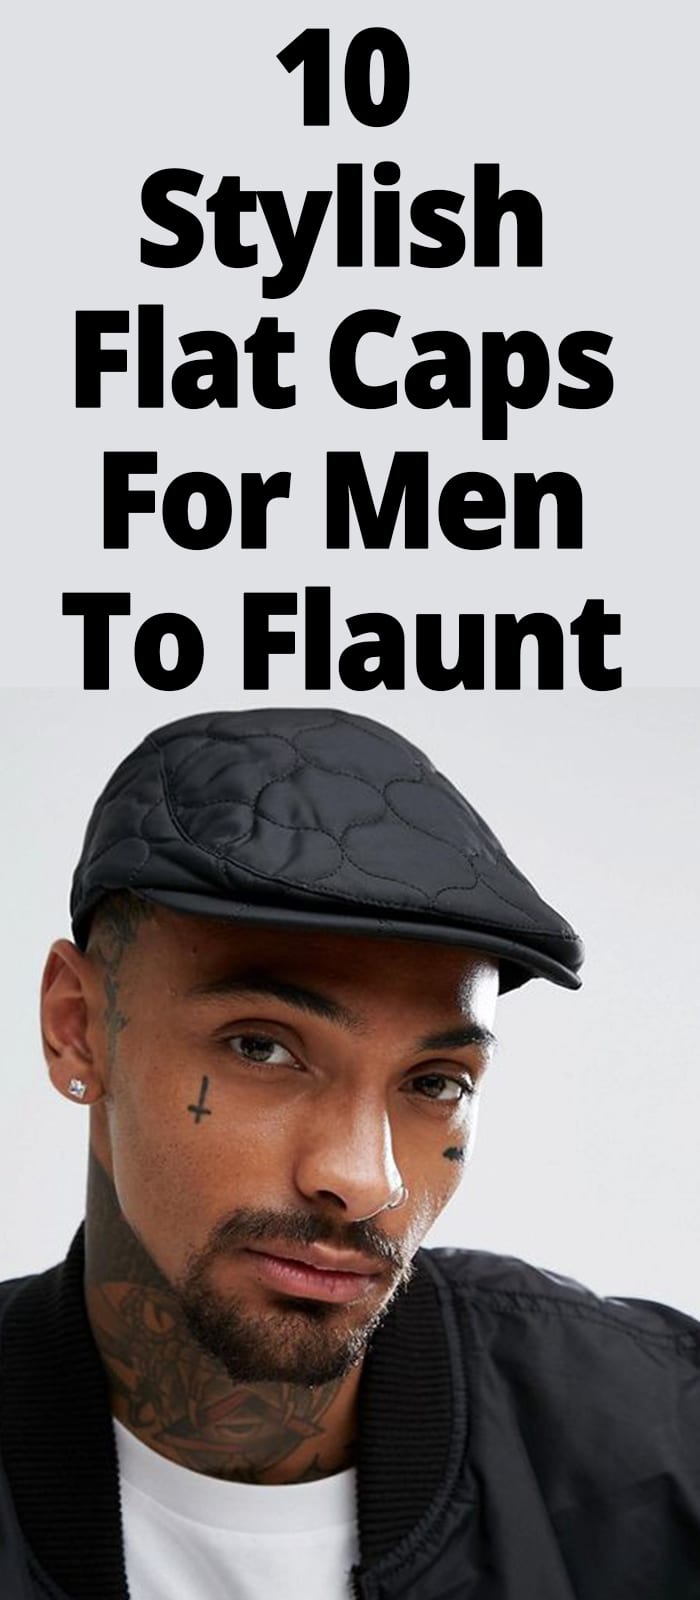 FLAT CAPS FOR MEN TO FLAUNT